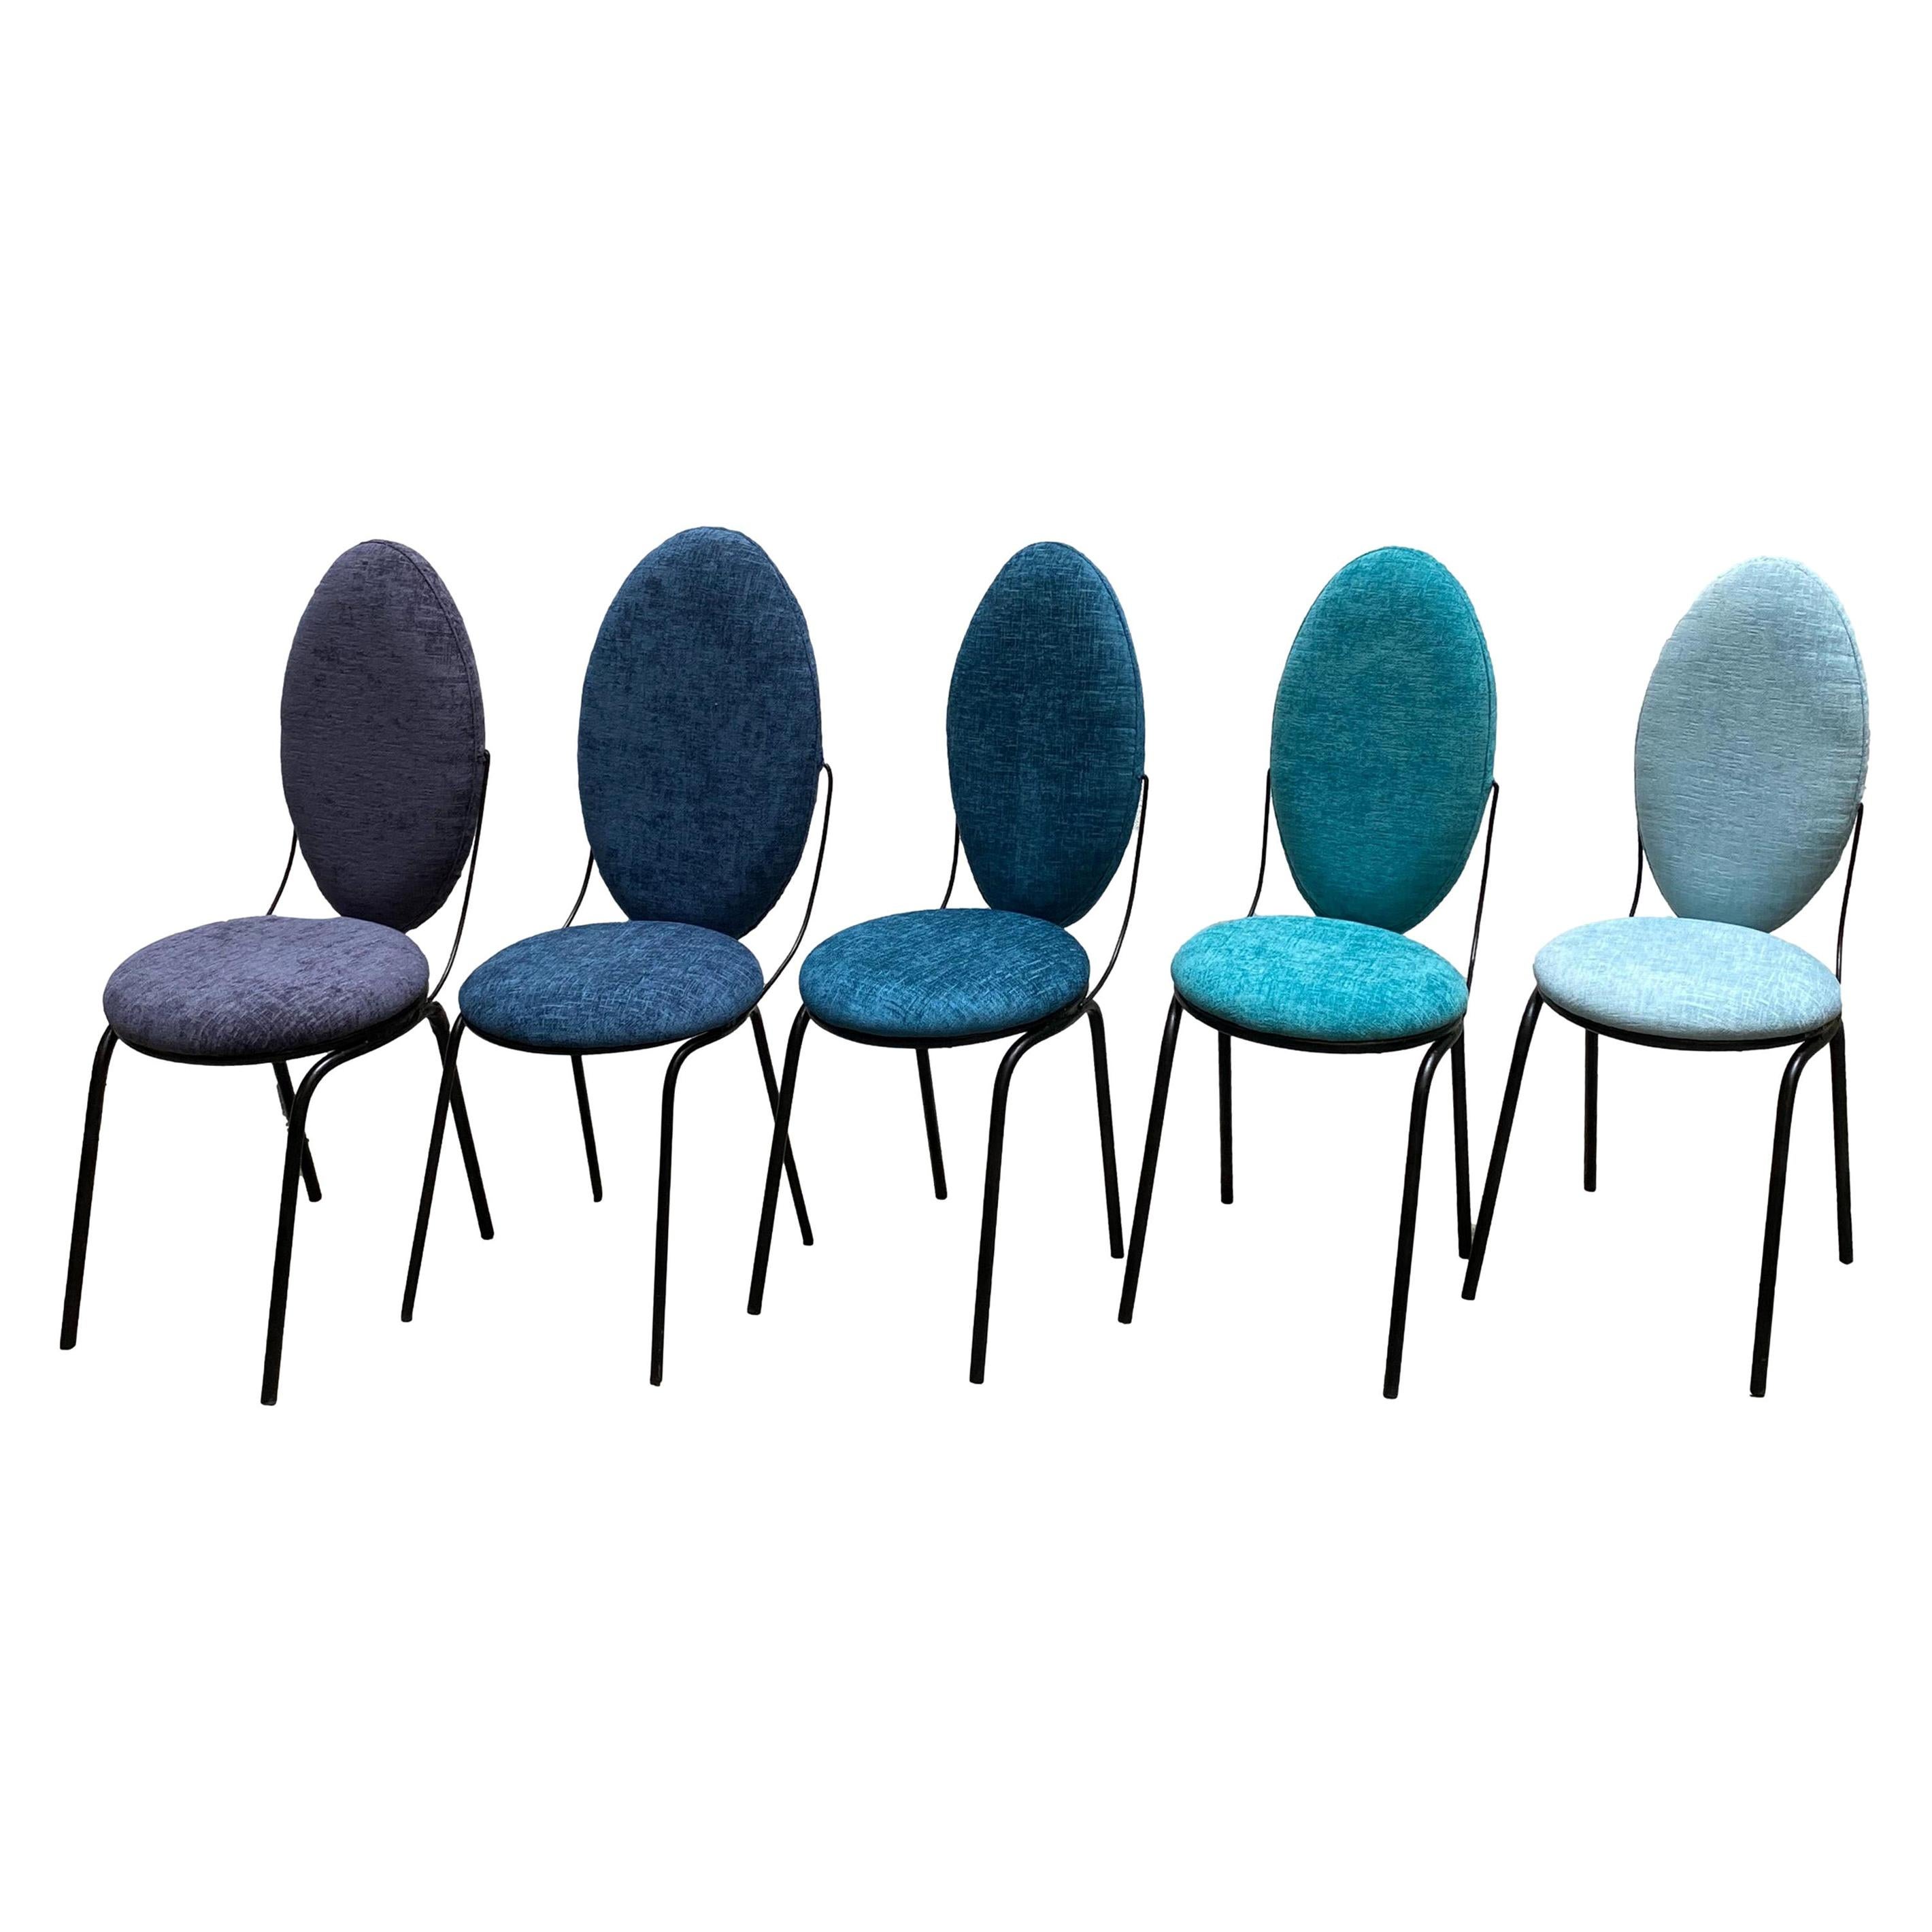 Group of 5 Chairs with Oval Backrest, Italy, 1960 For Sale